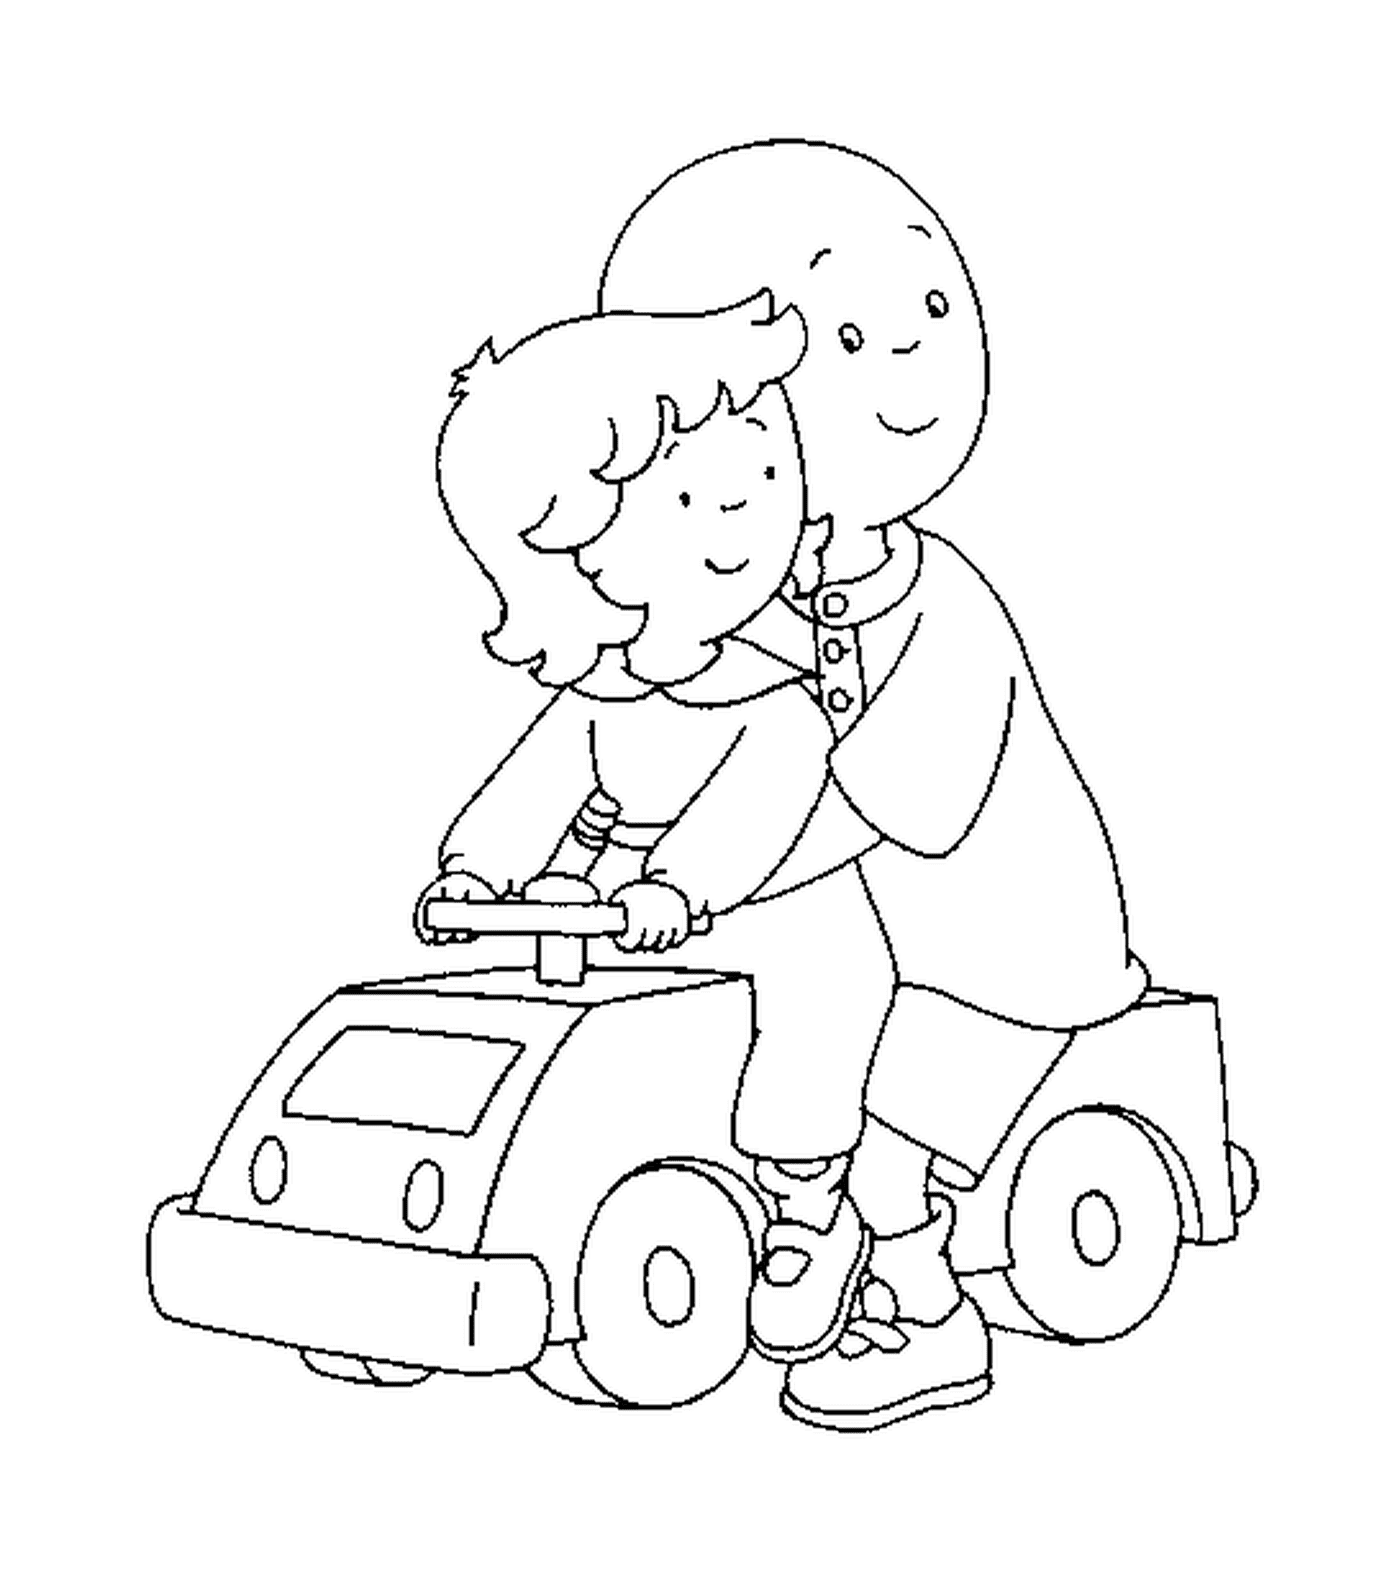  Caillou and Moussline play the car together 